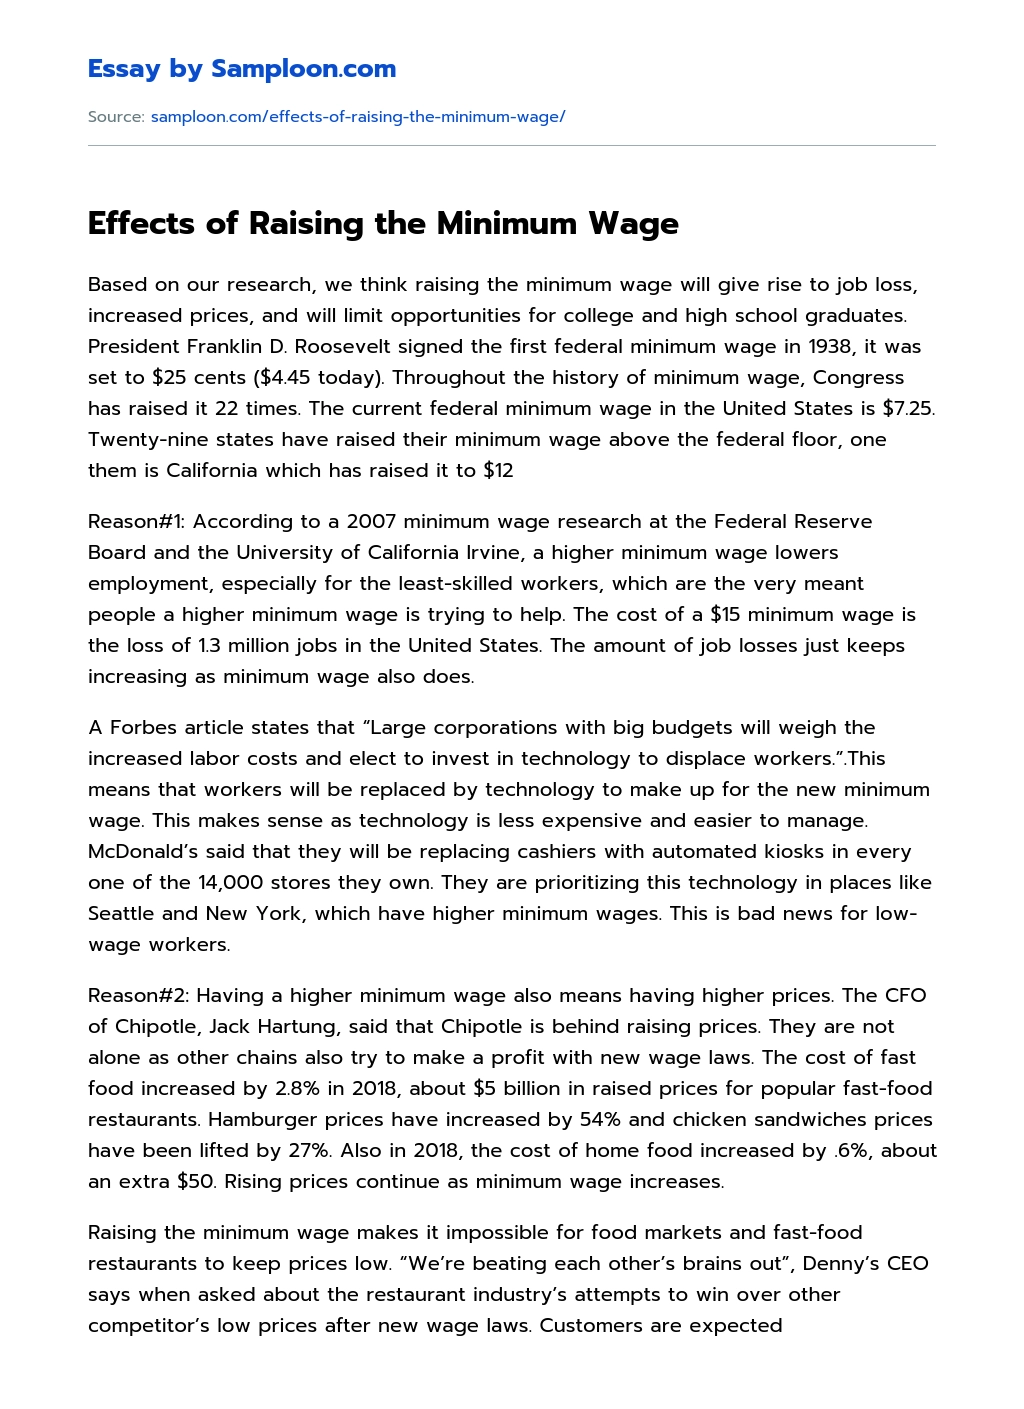 conclusion for minimum wage essay